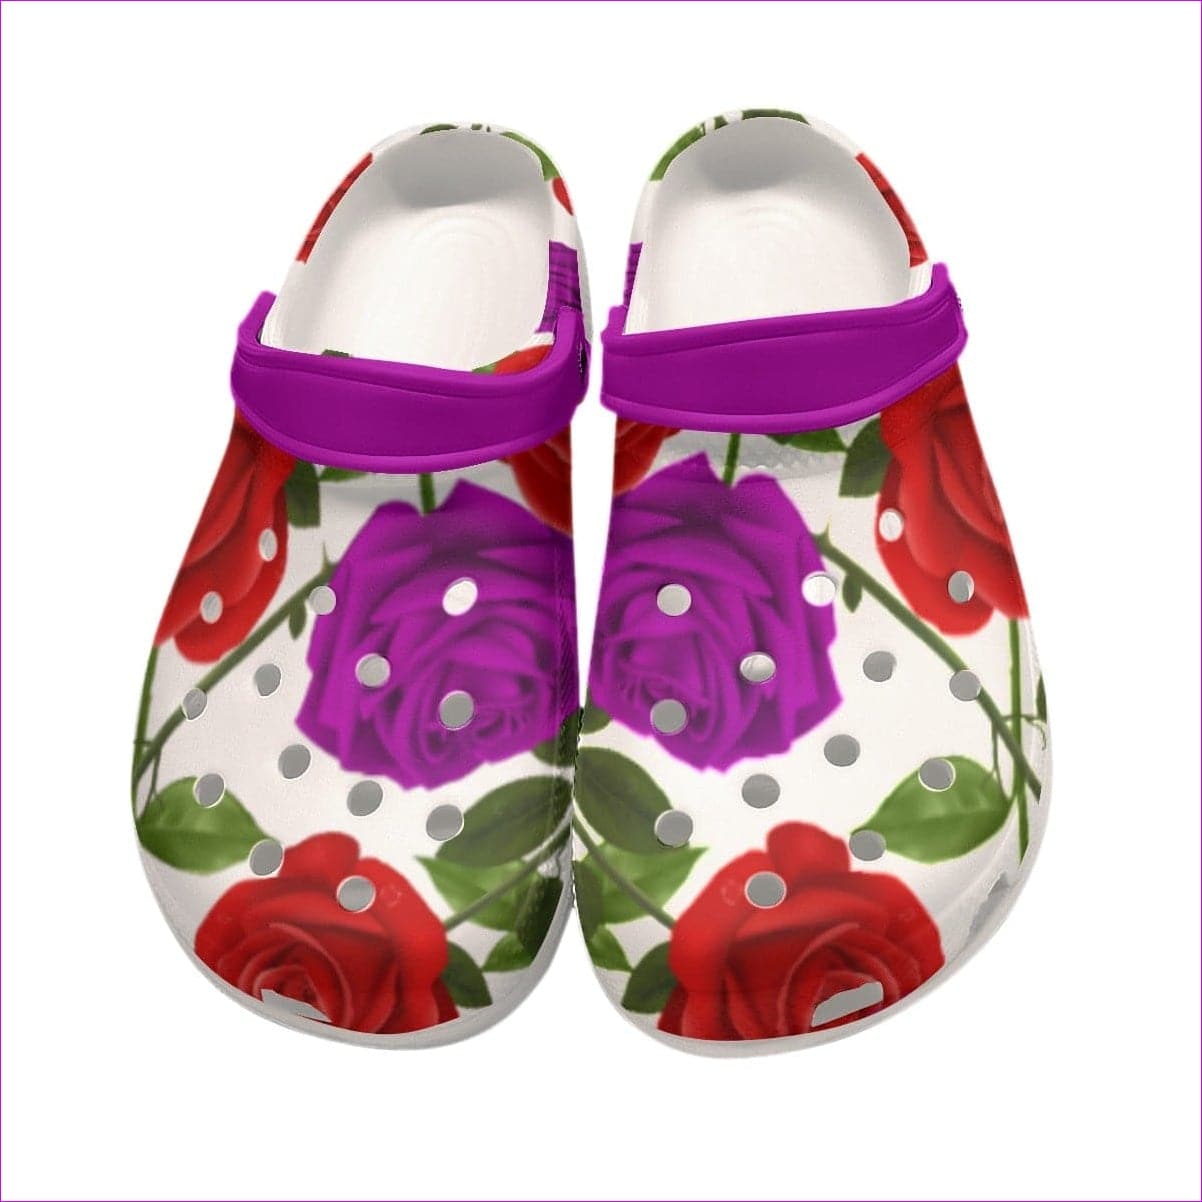 Red Rose Purp Classic Women's Clogs - women's clogs at TFC&H Co.